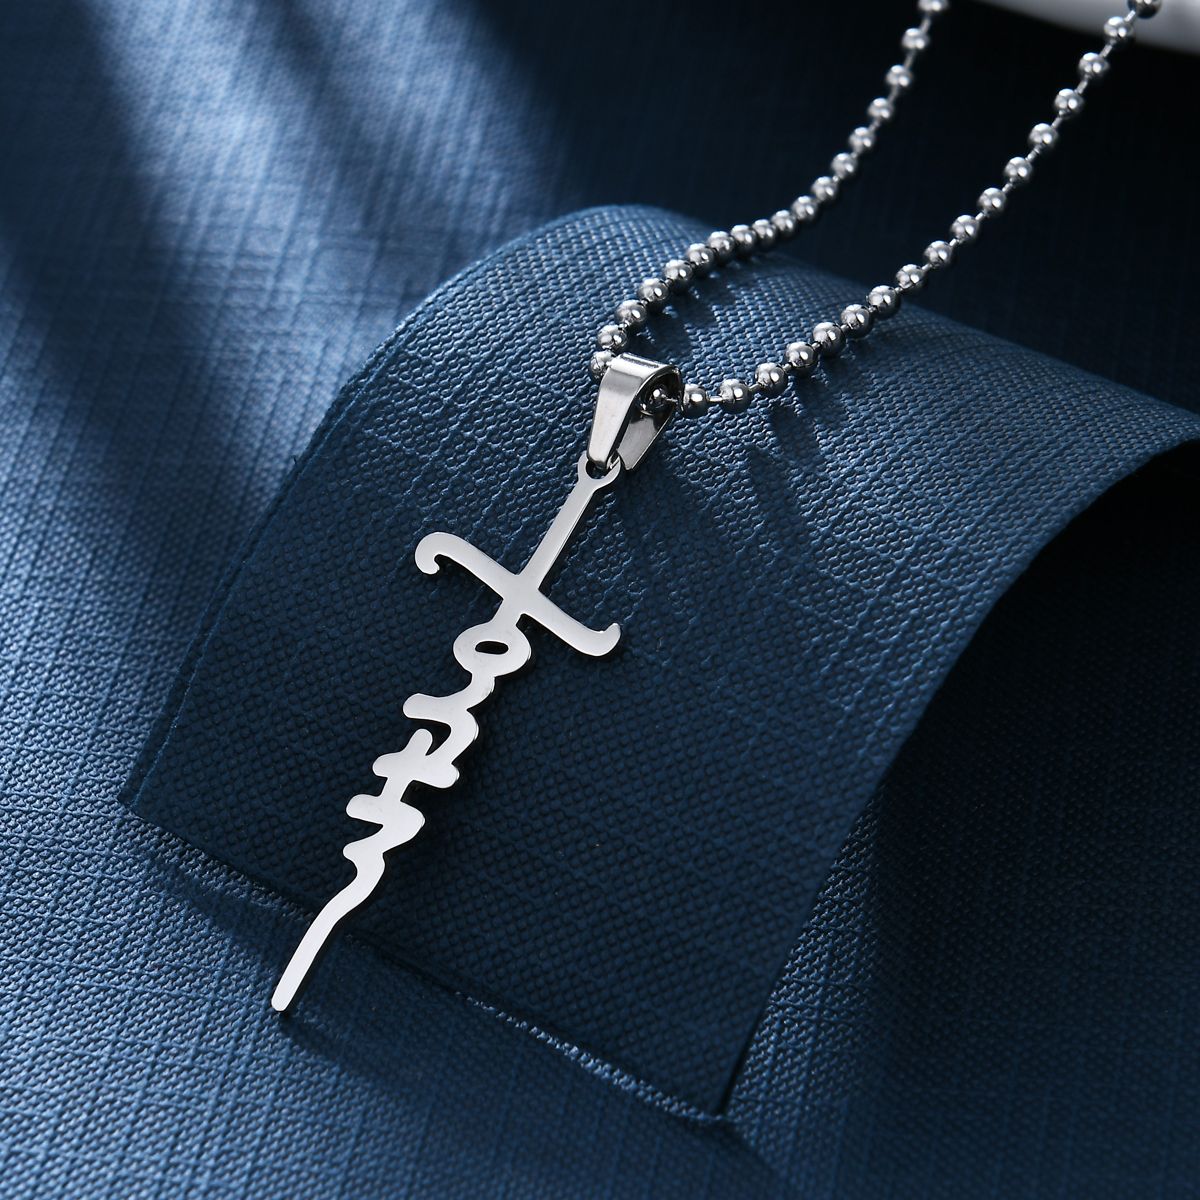 Silver Faith Cross Necklace Top Sellers, 53% OFF | www.vetyvet.com